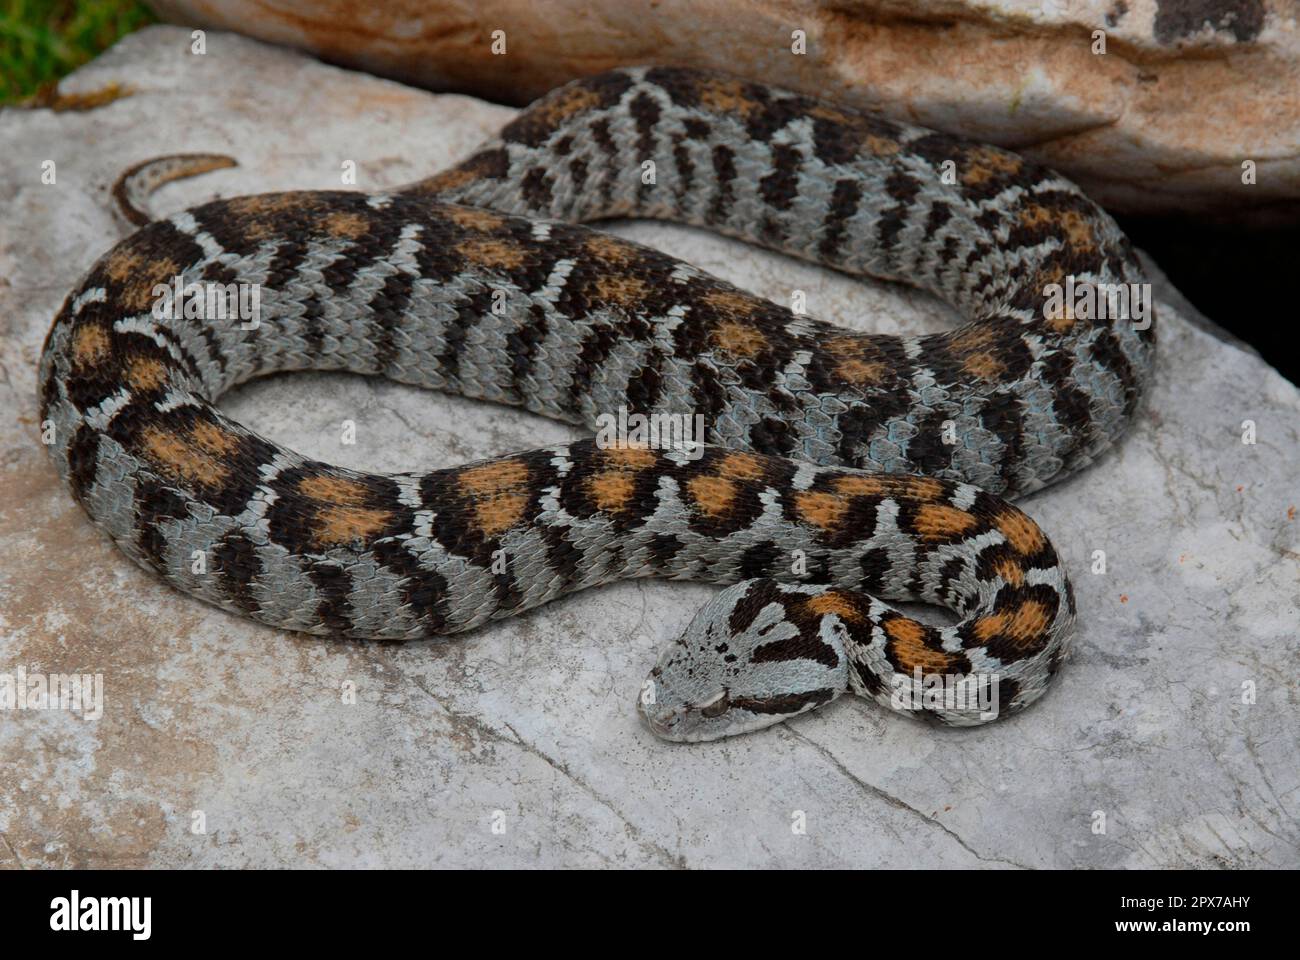 Wagner's mountain viper Stock Photo